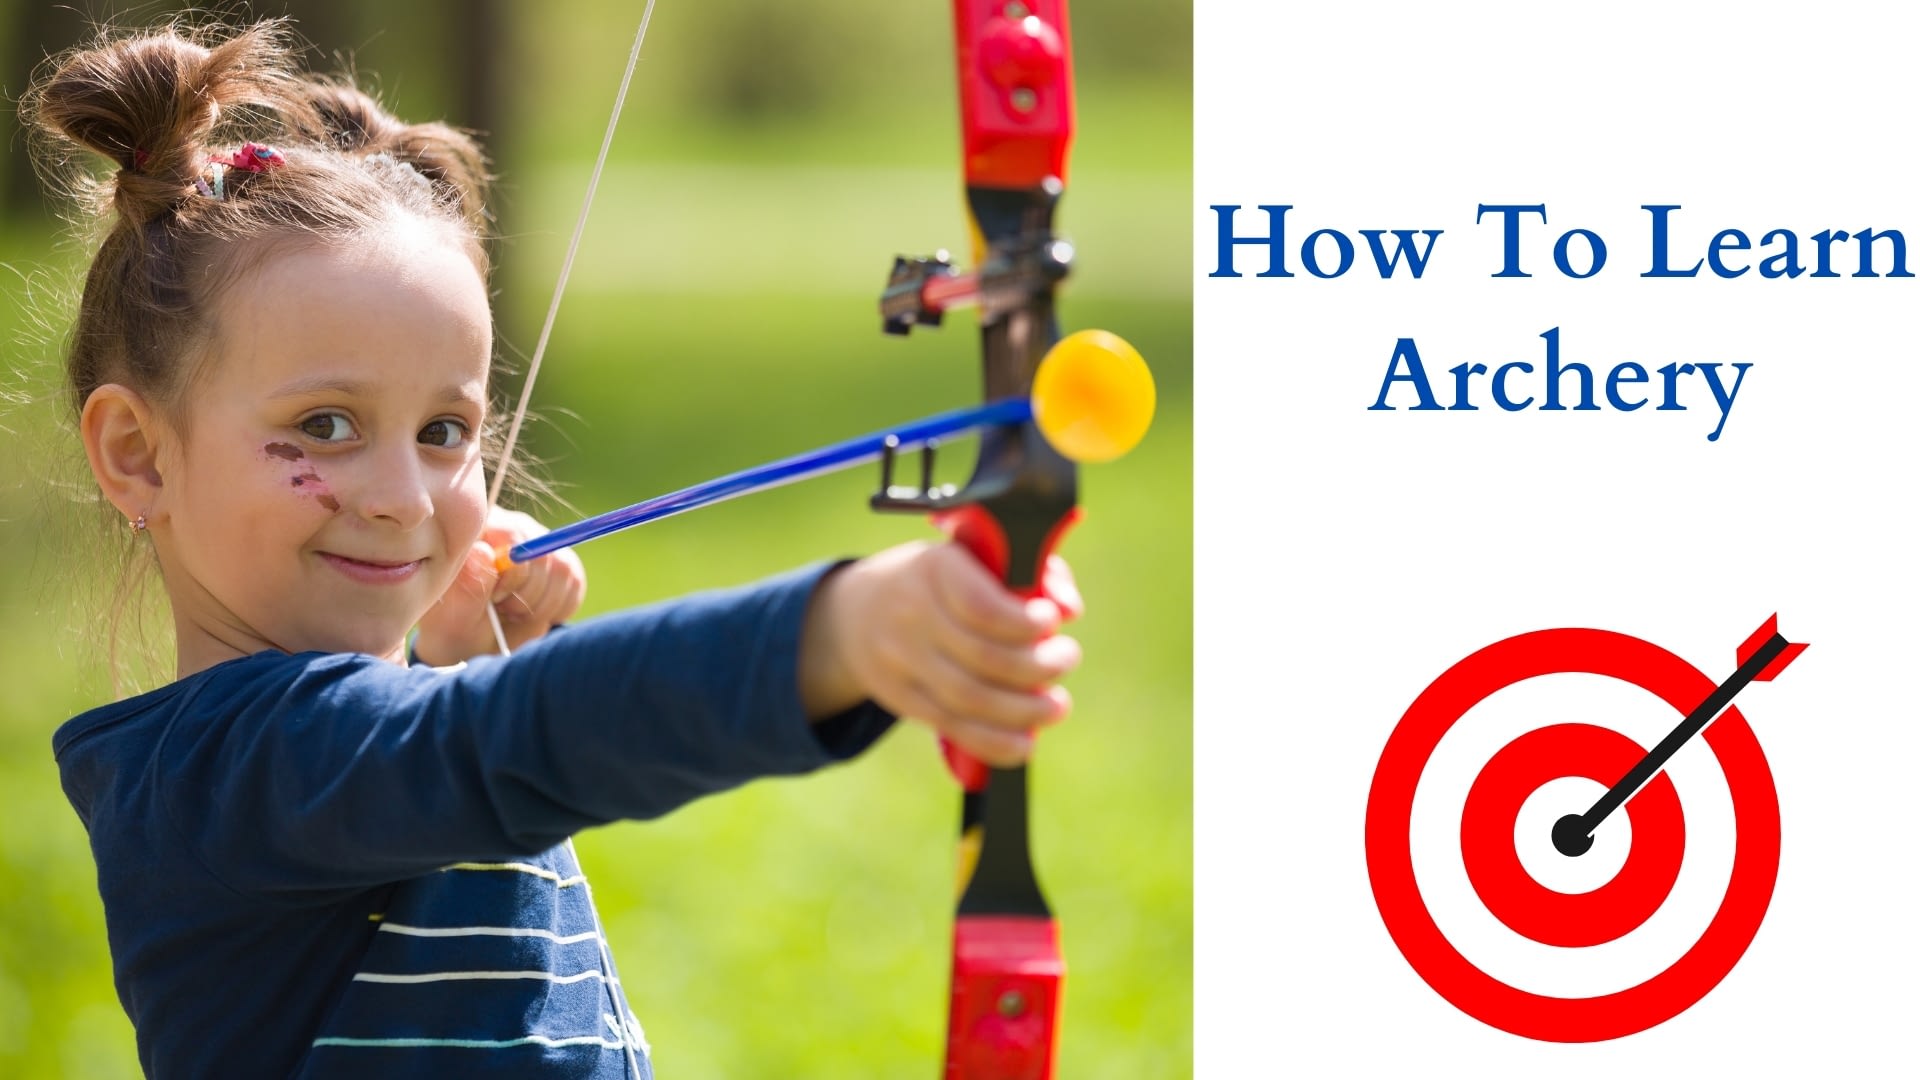 How To Learn Archery